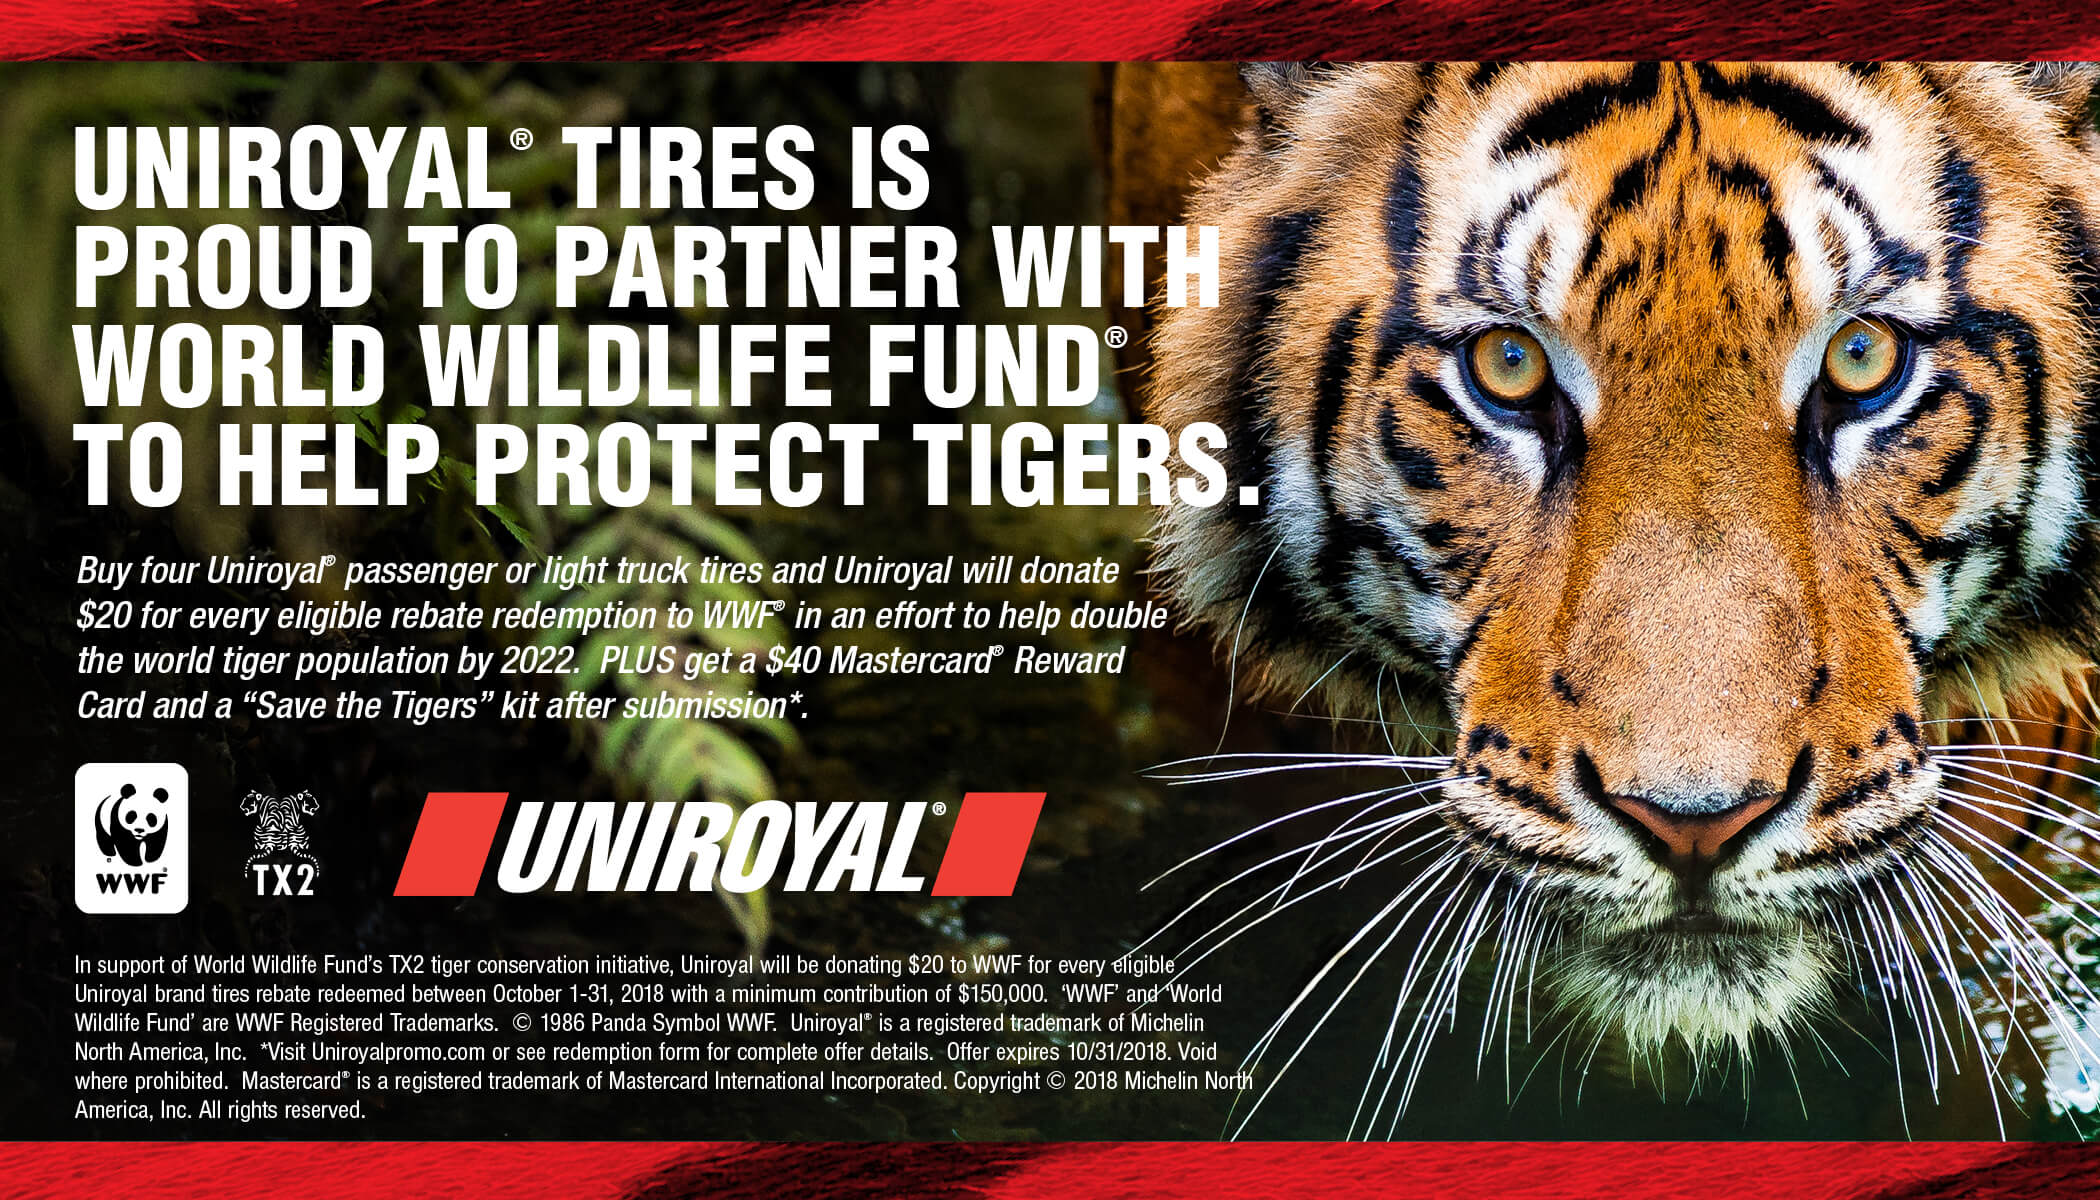 WWF and Uniroyal Protecting Tigers